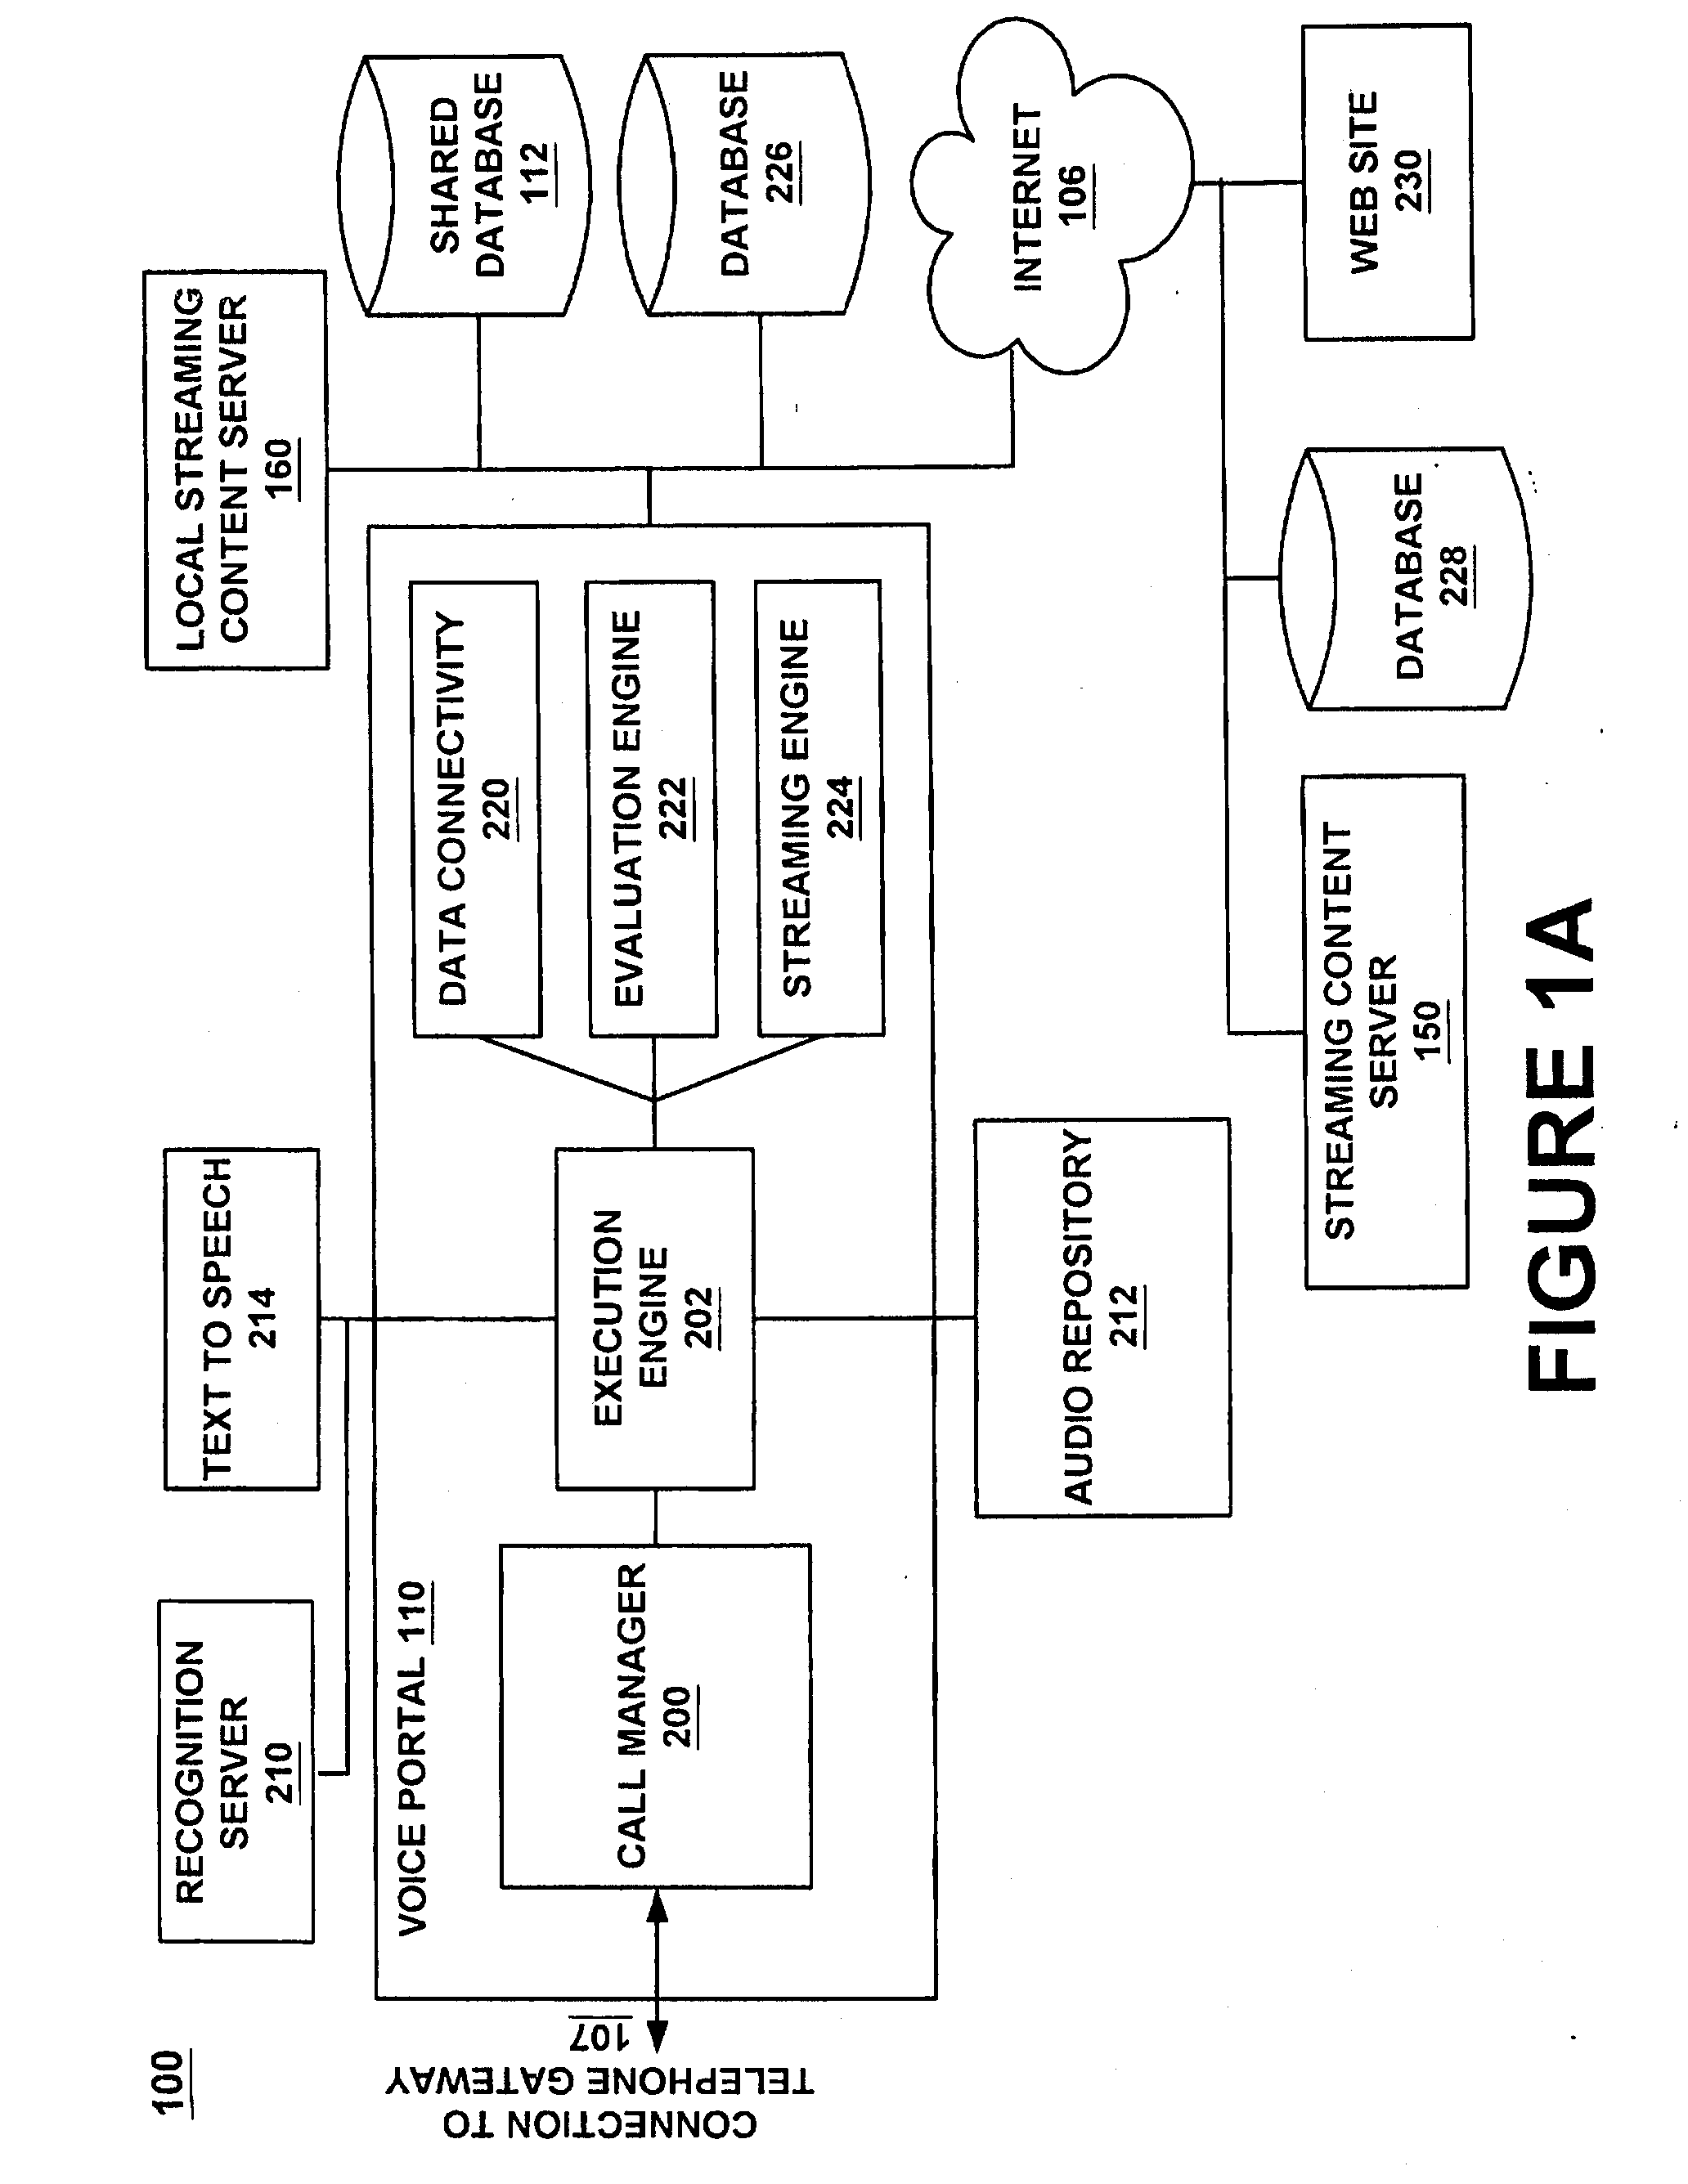 Method and system for providing menu and other services for an information processing system using a telephone or other audio interface